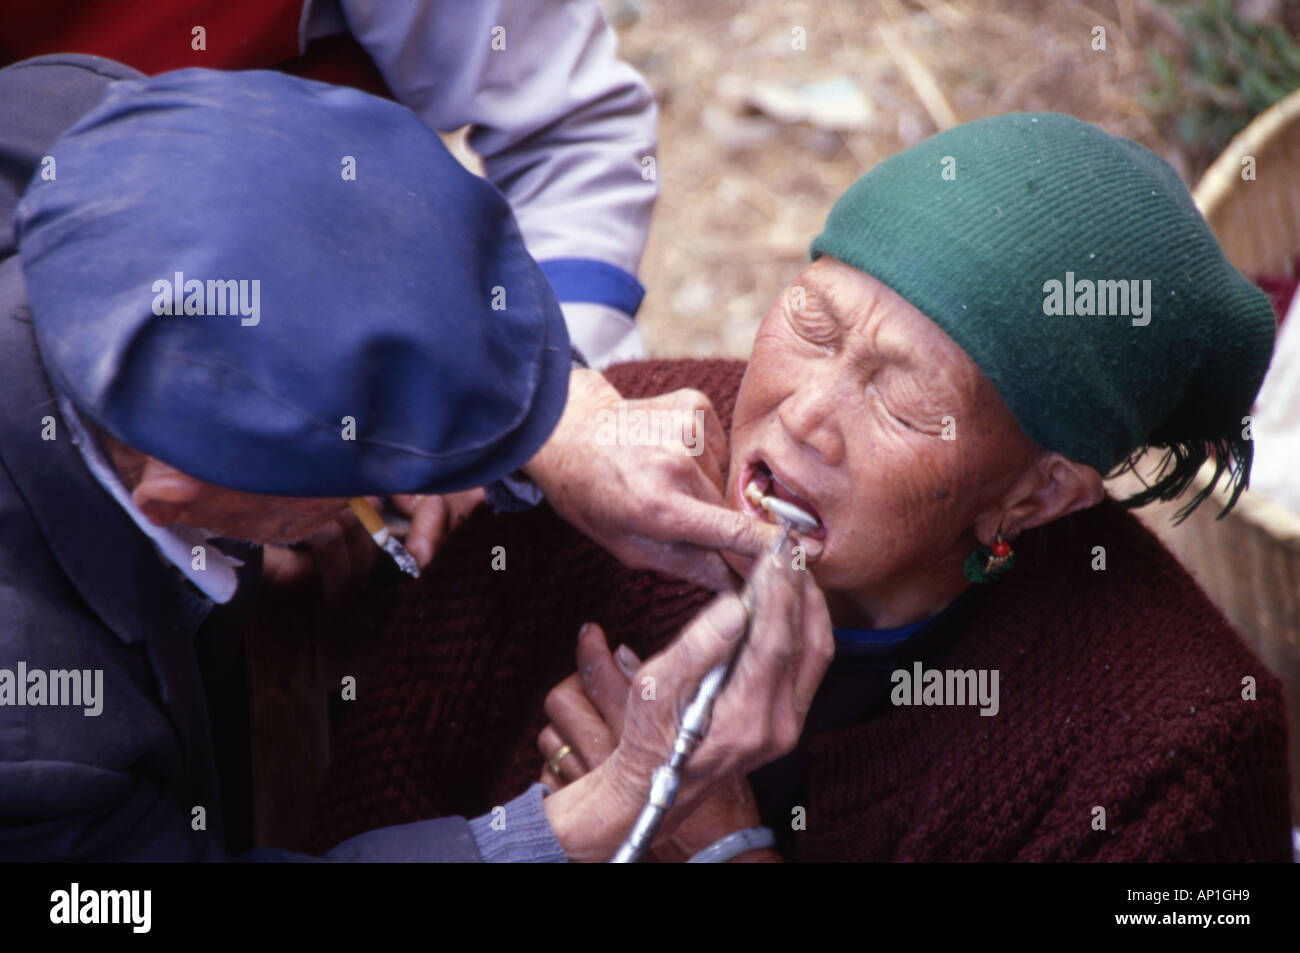 local dentist working on a local womans teeth shaping market yunnan province china Stock Photo